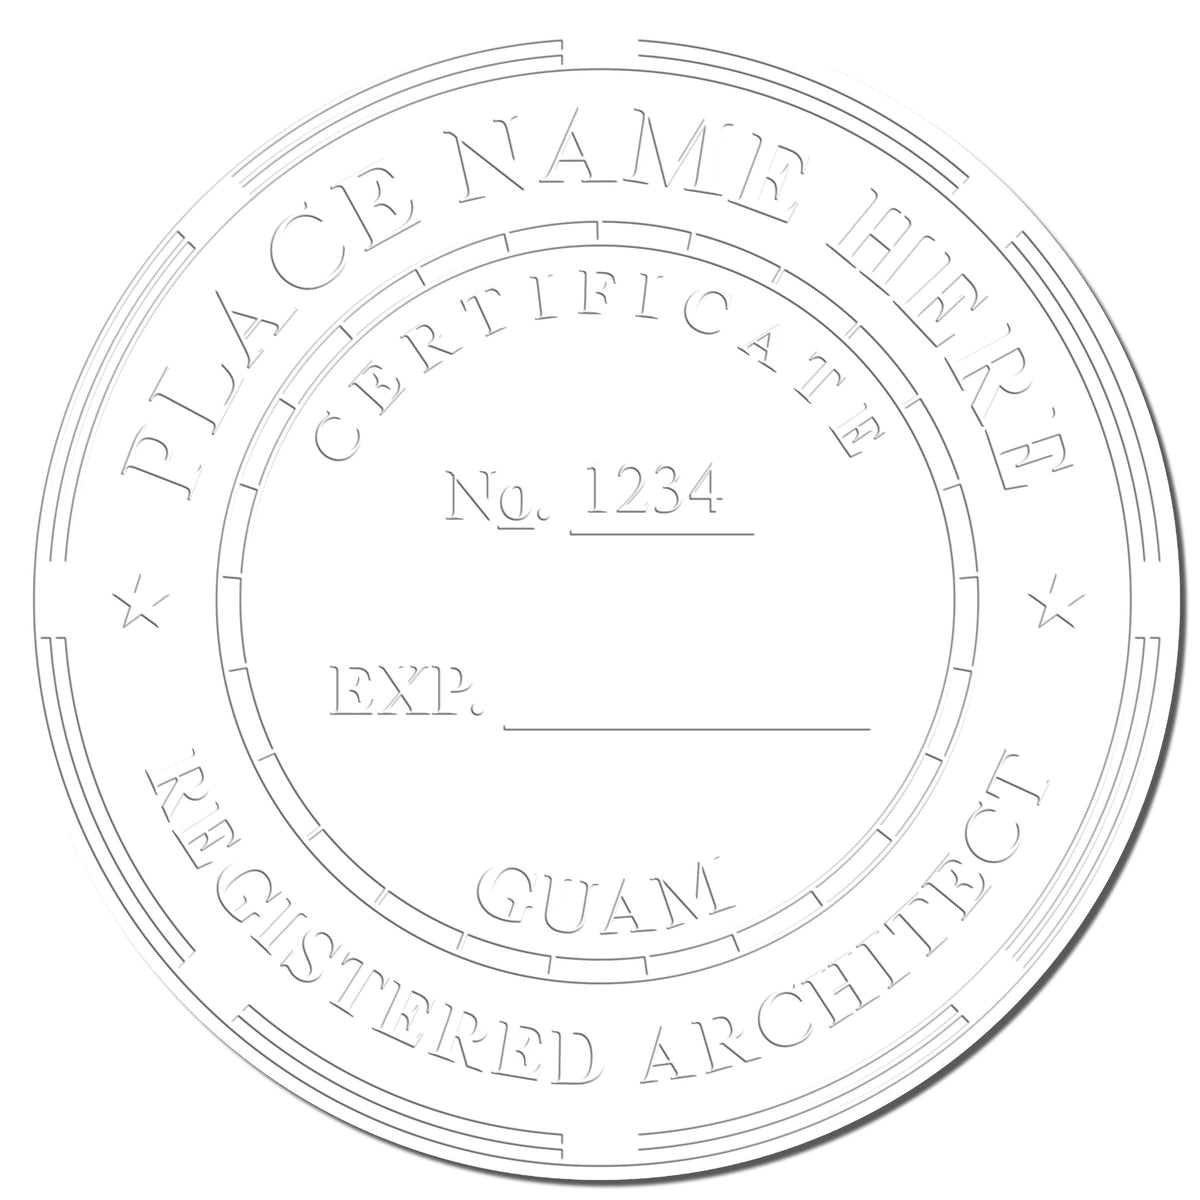 A photograph of the Extended Long Reach Guam Architect Seal Embosser stamp impression reveals a vivid, professional image of the on paper.